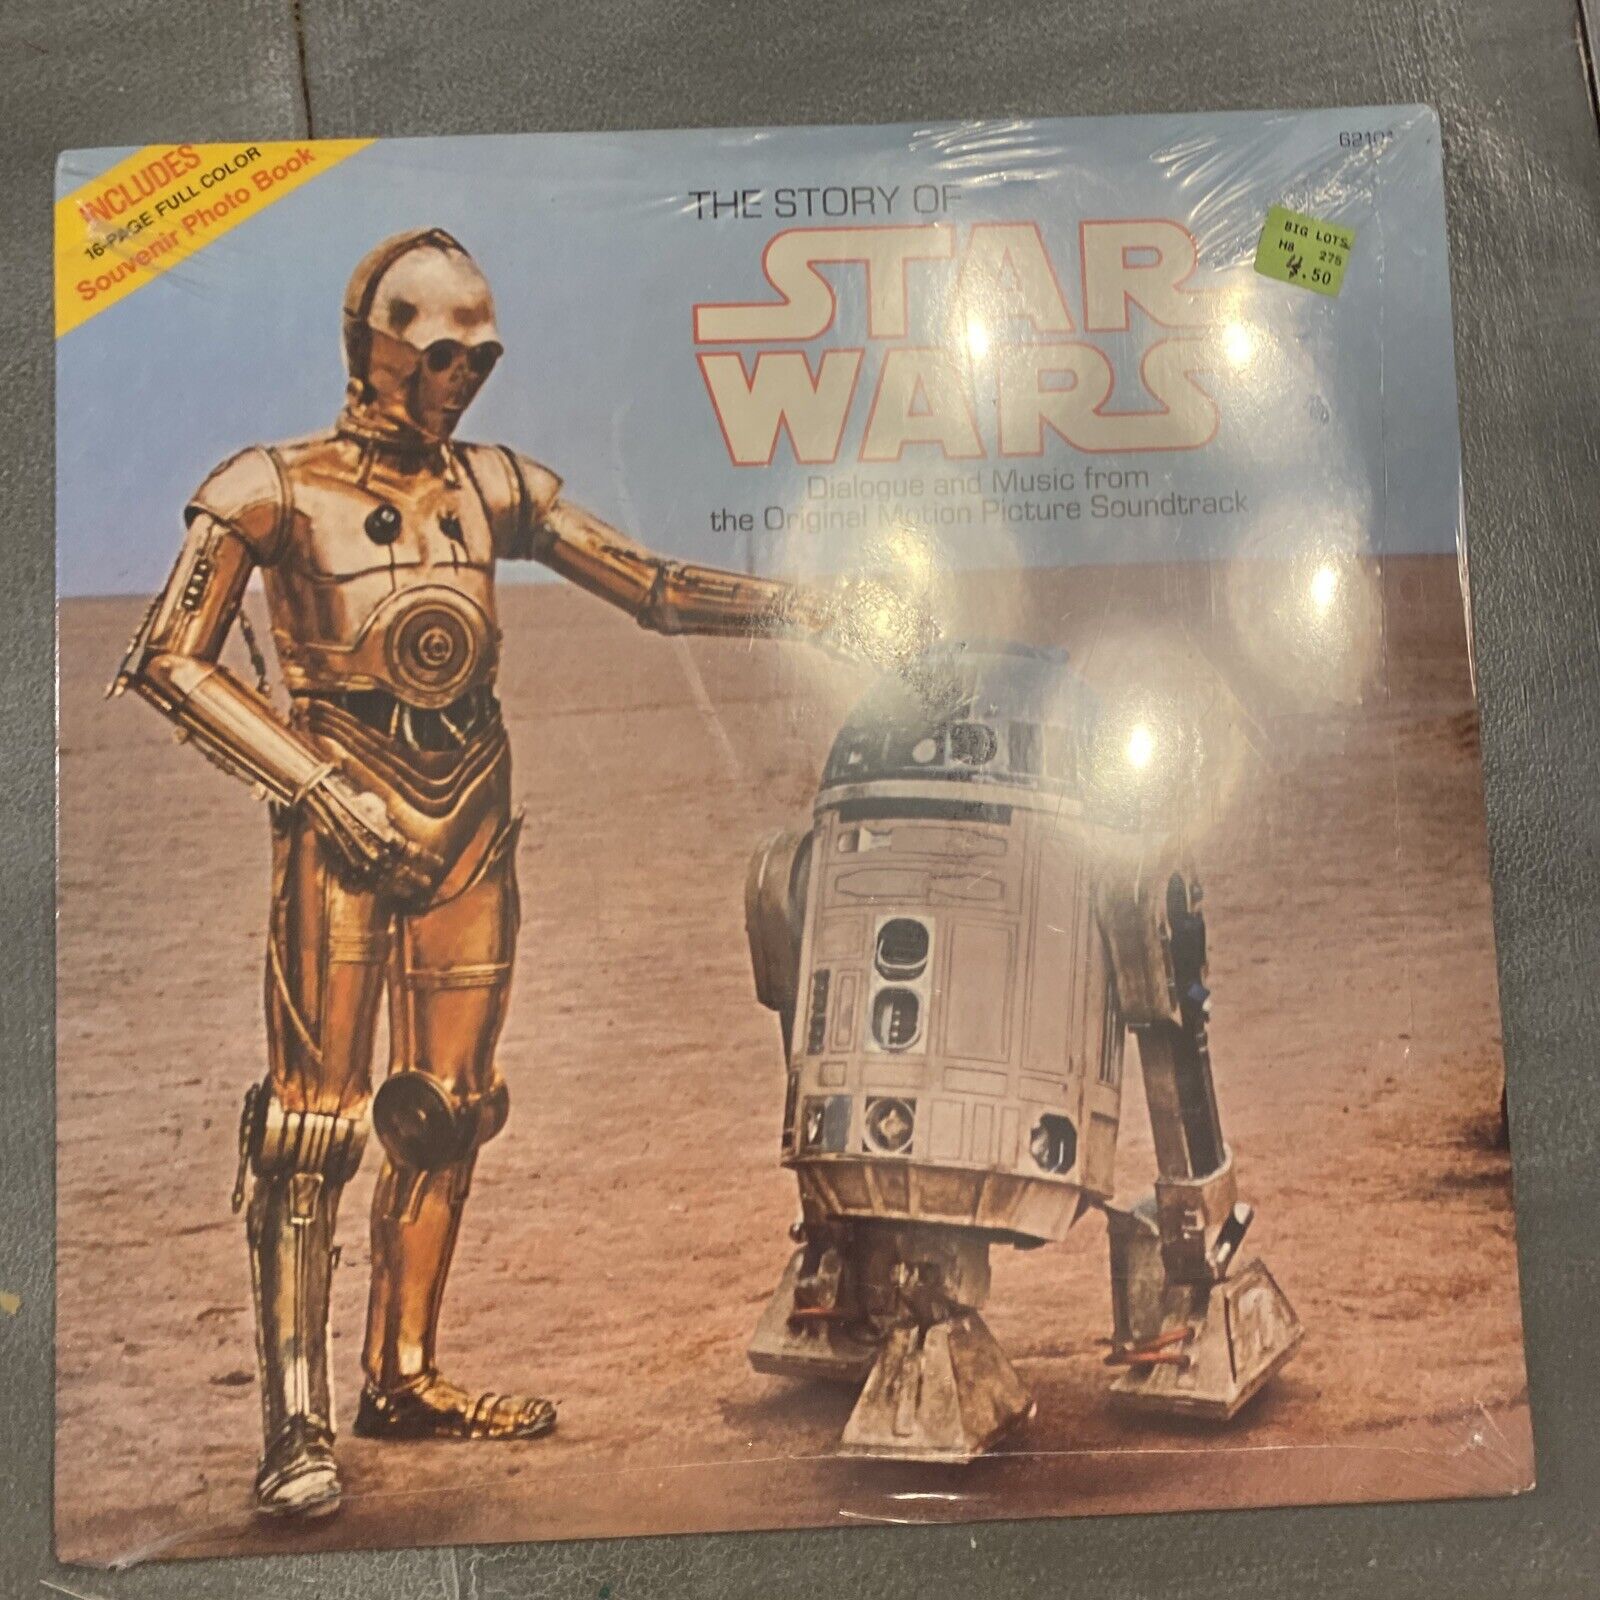 1977 The Story of Star Wars Vinyl LP with Souvenir Photo Book New